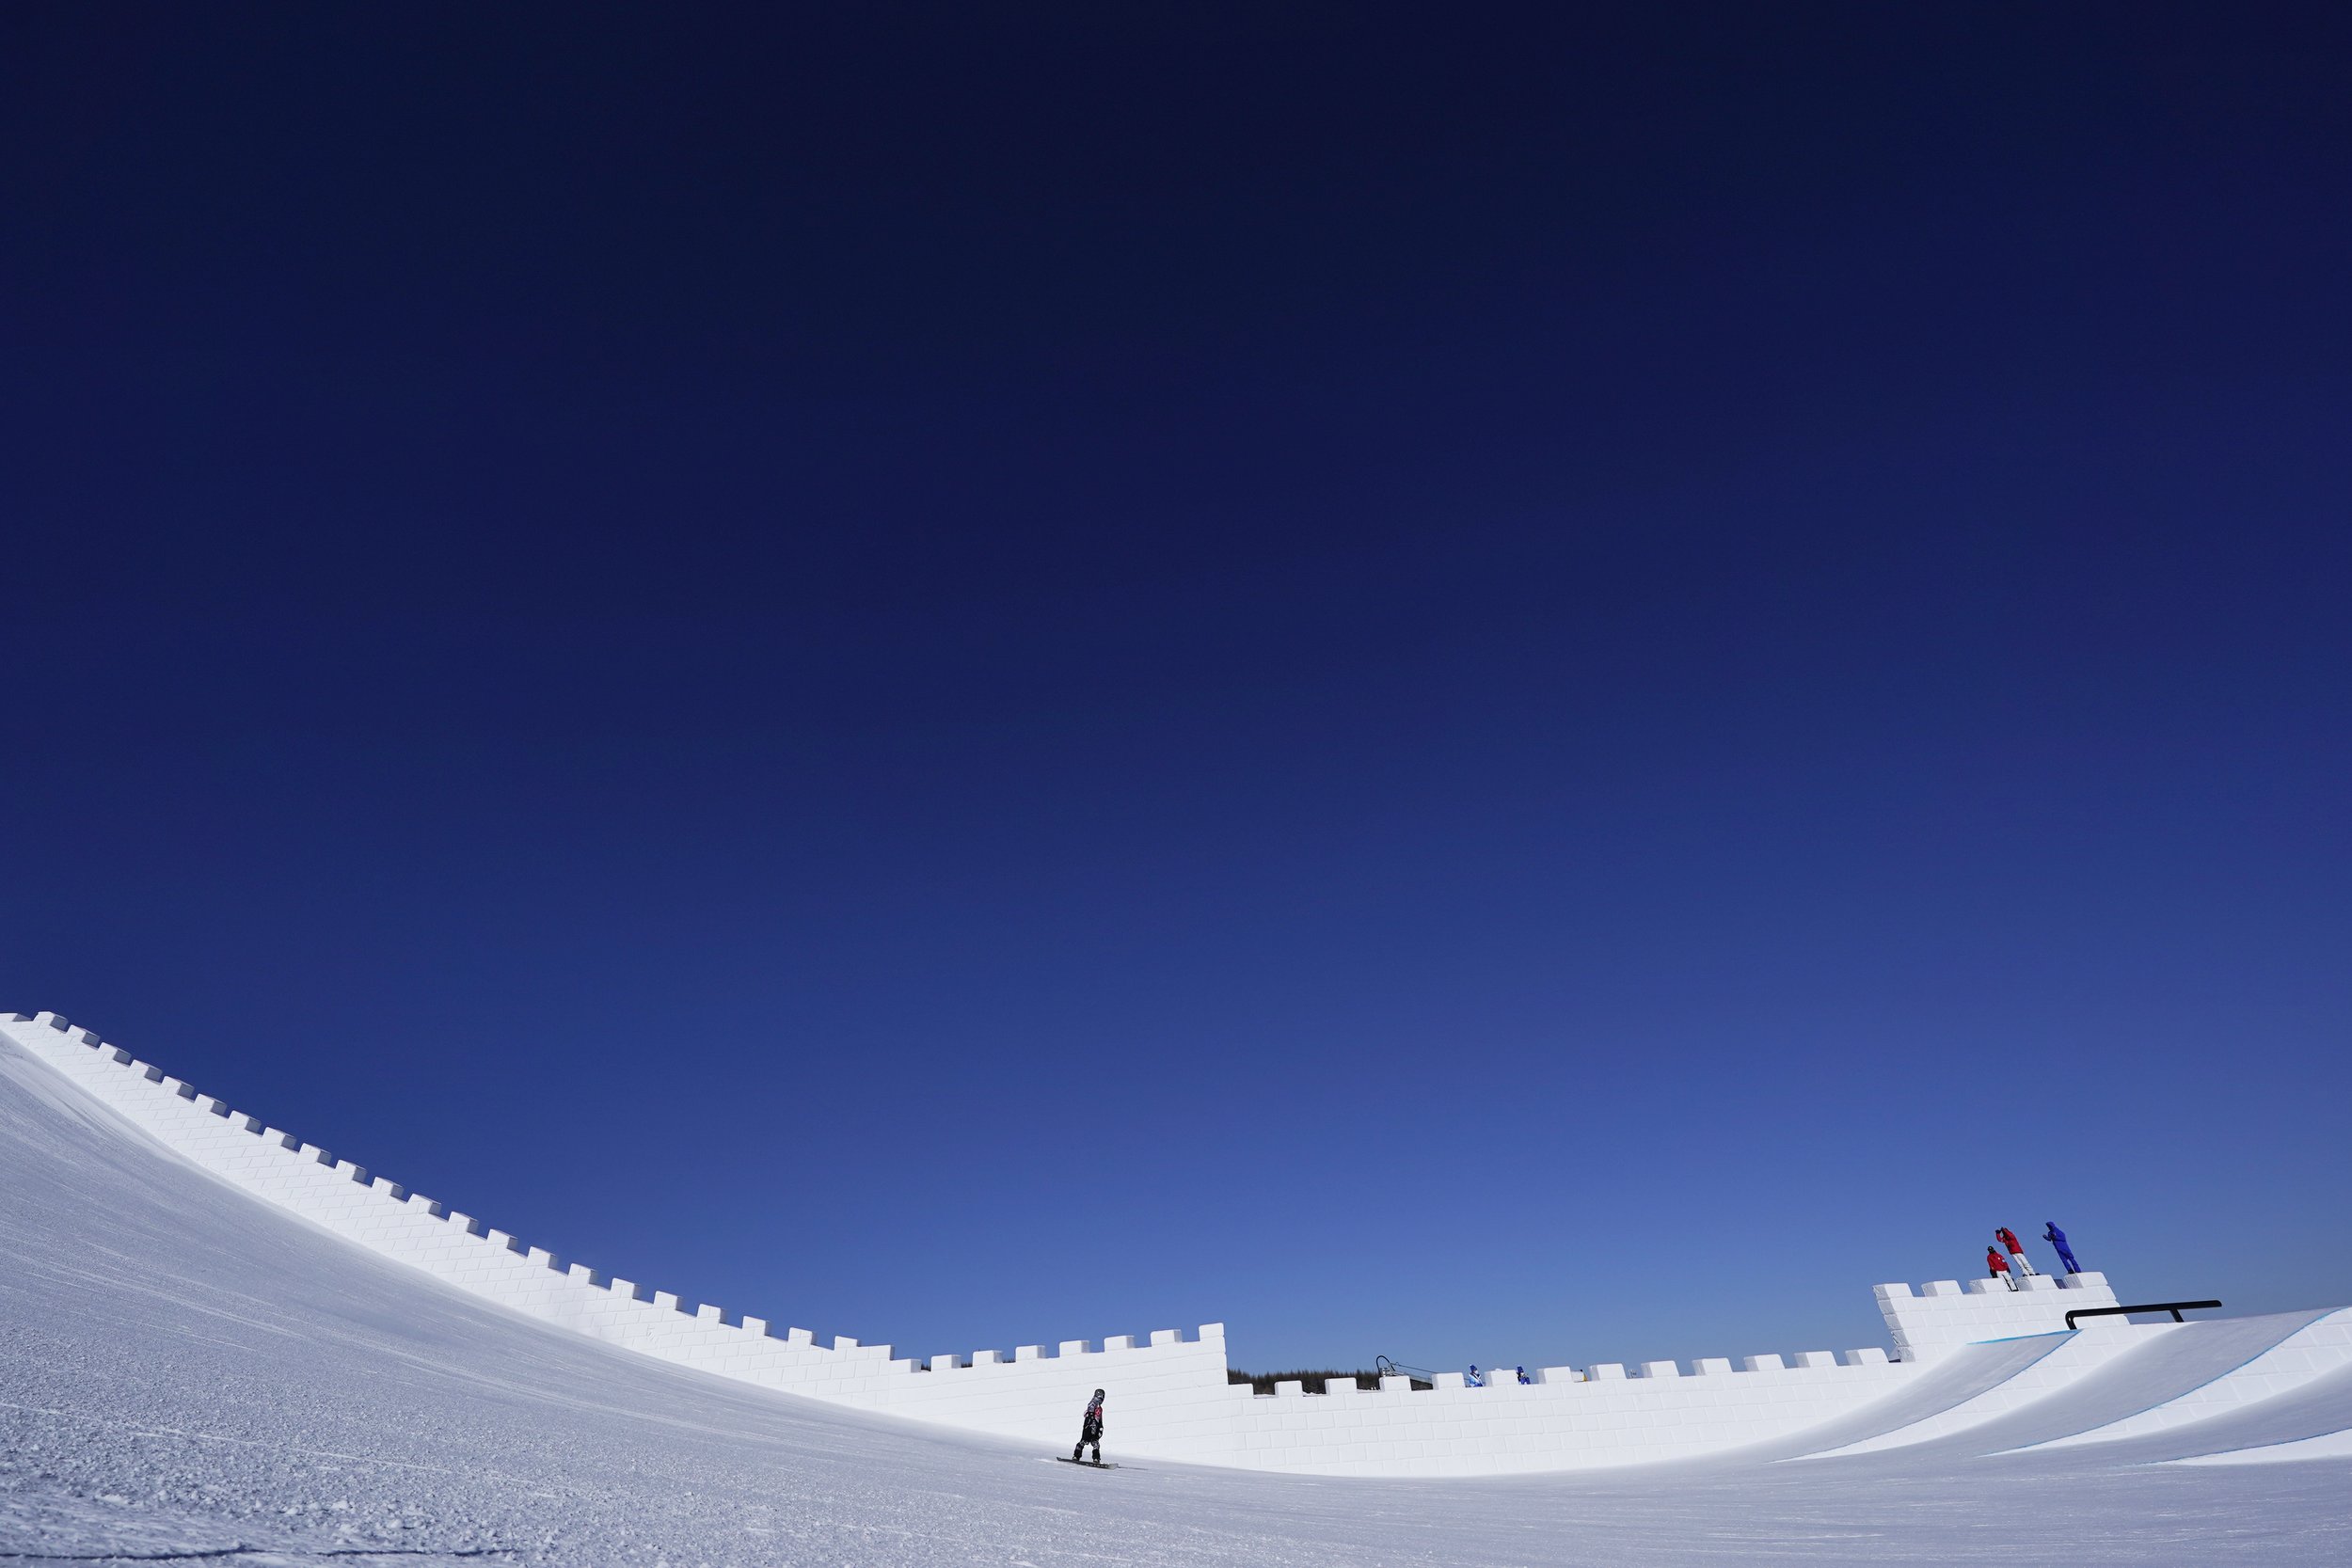  A snowboarder trains on the slopestyle course ahead of ahead of the 2022 Winter Olympics, Feb. 2, 2022, in Zhangjiakou, China. (AP Photo/Gregory Bull) 